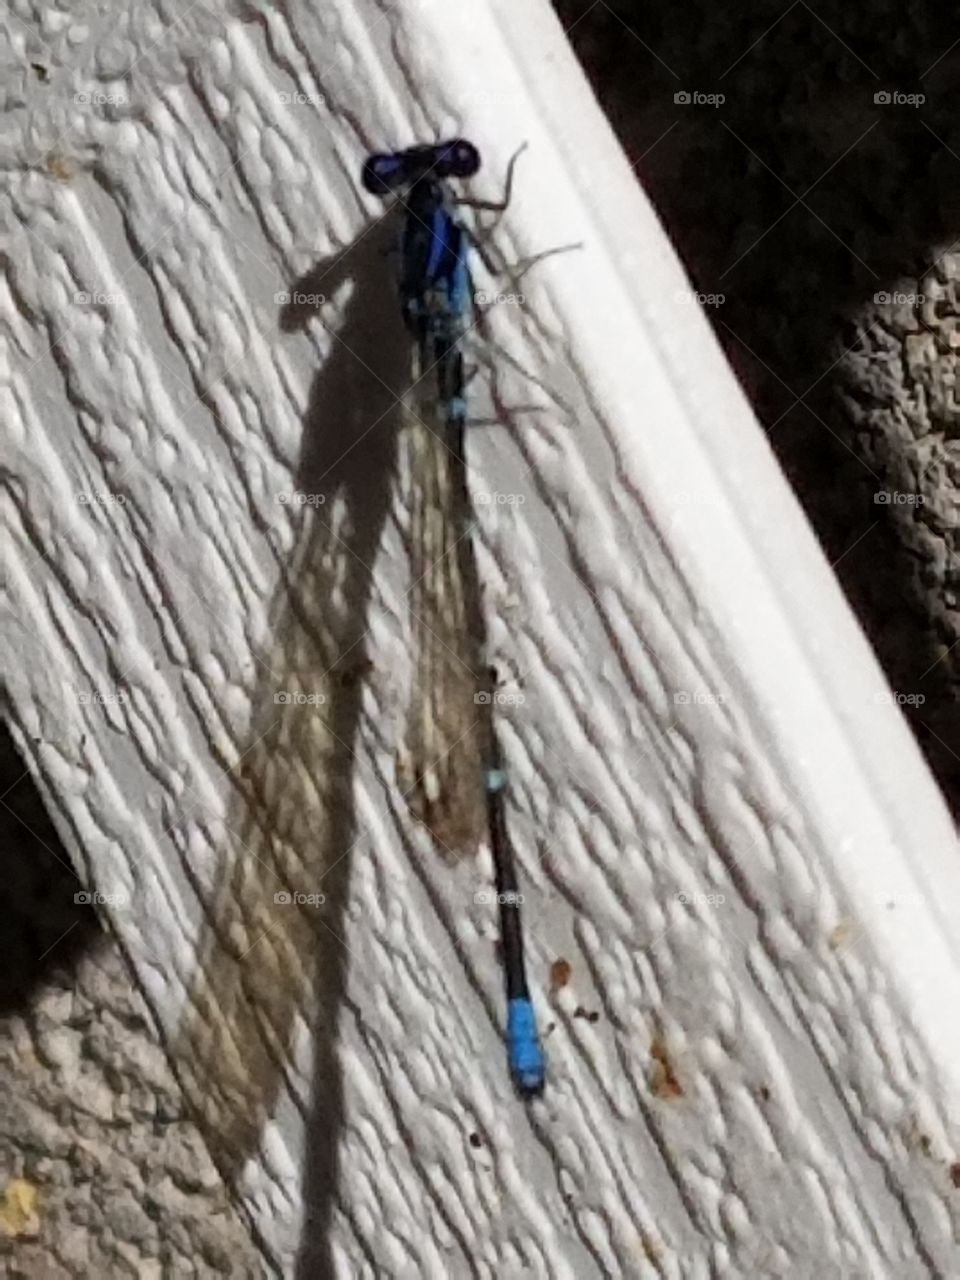 Dragonfly with Blue Accents